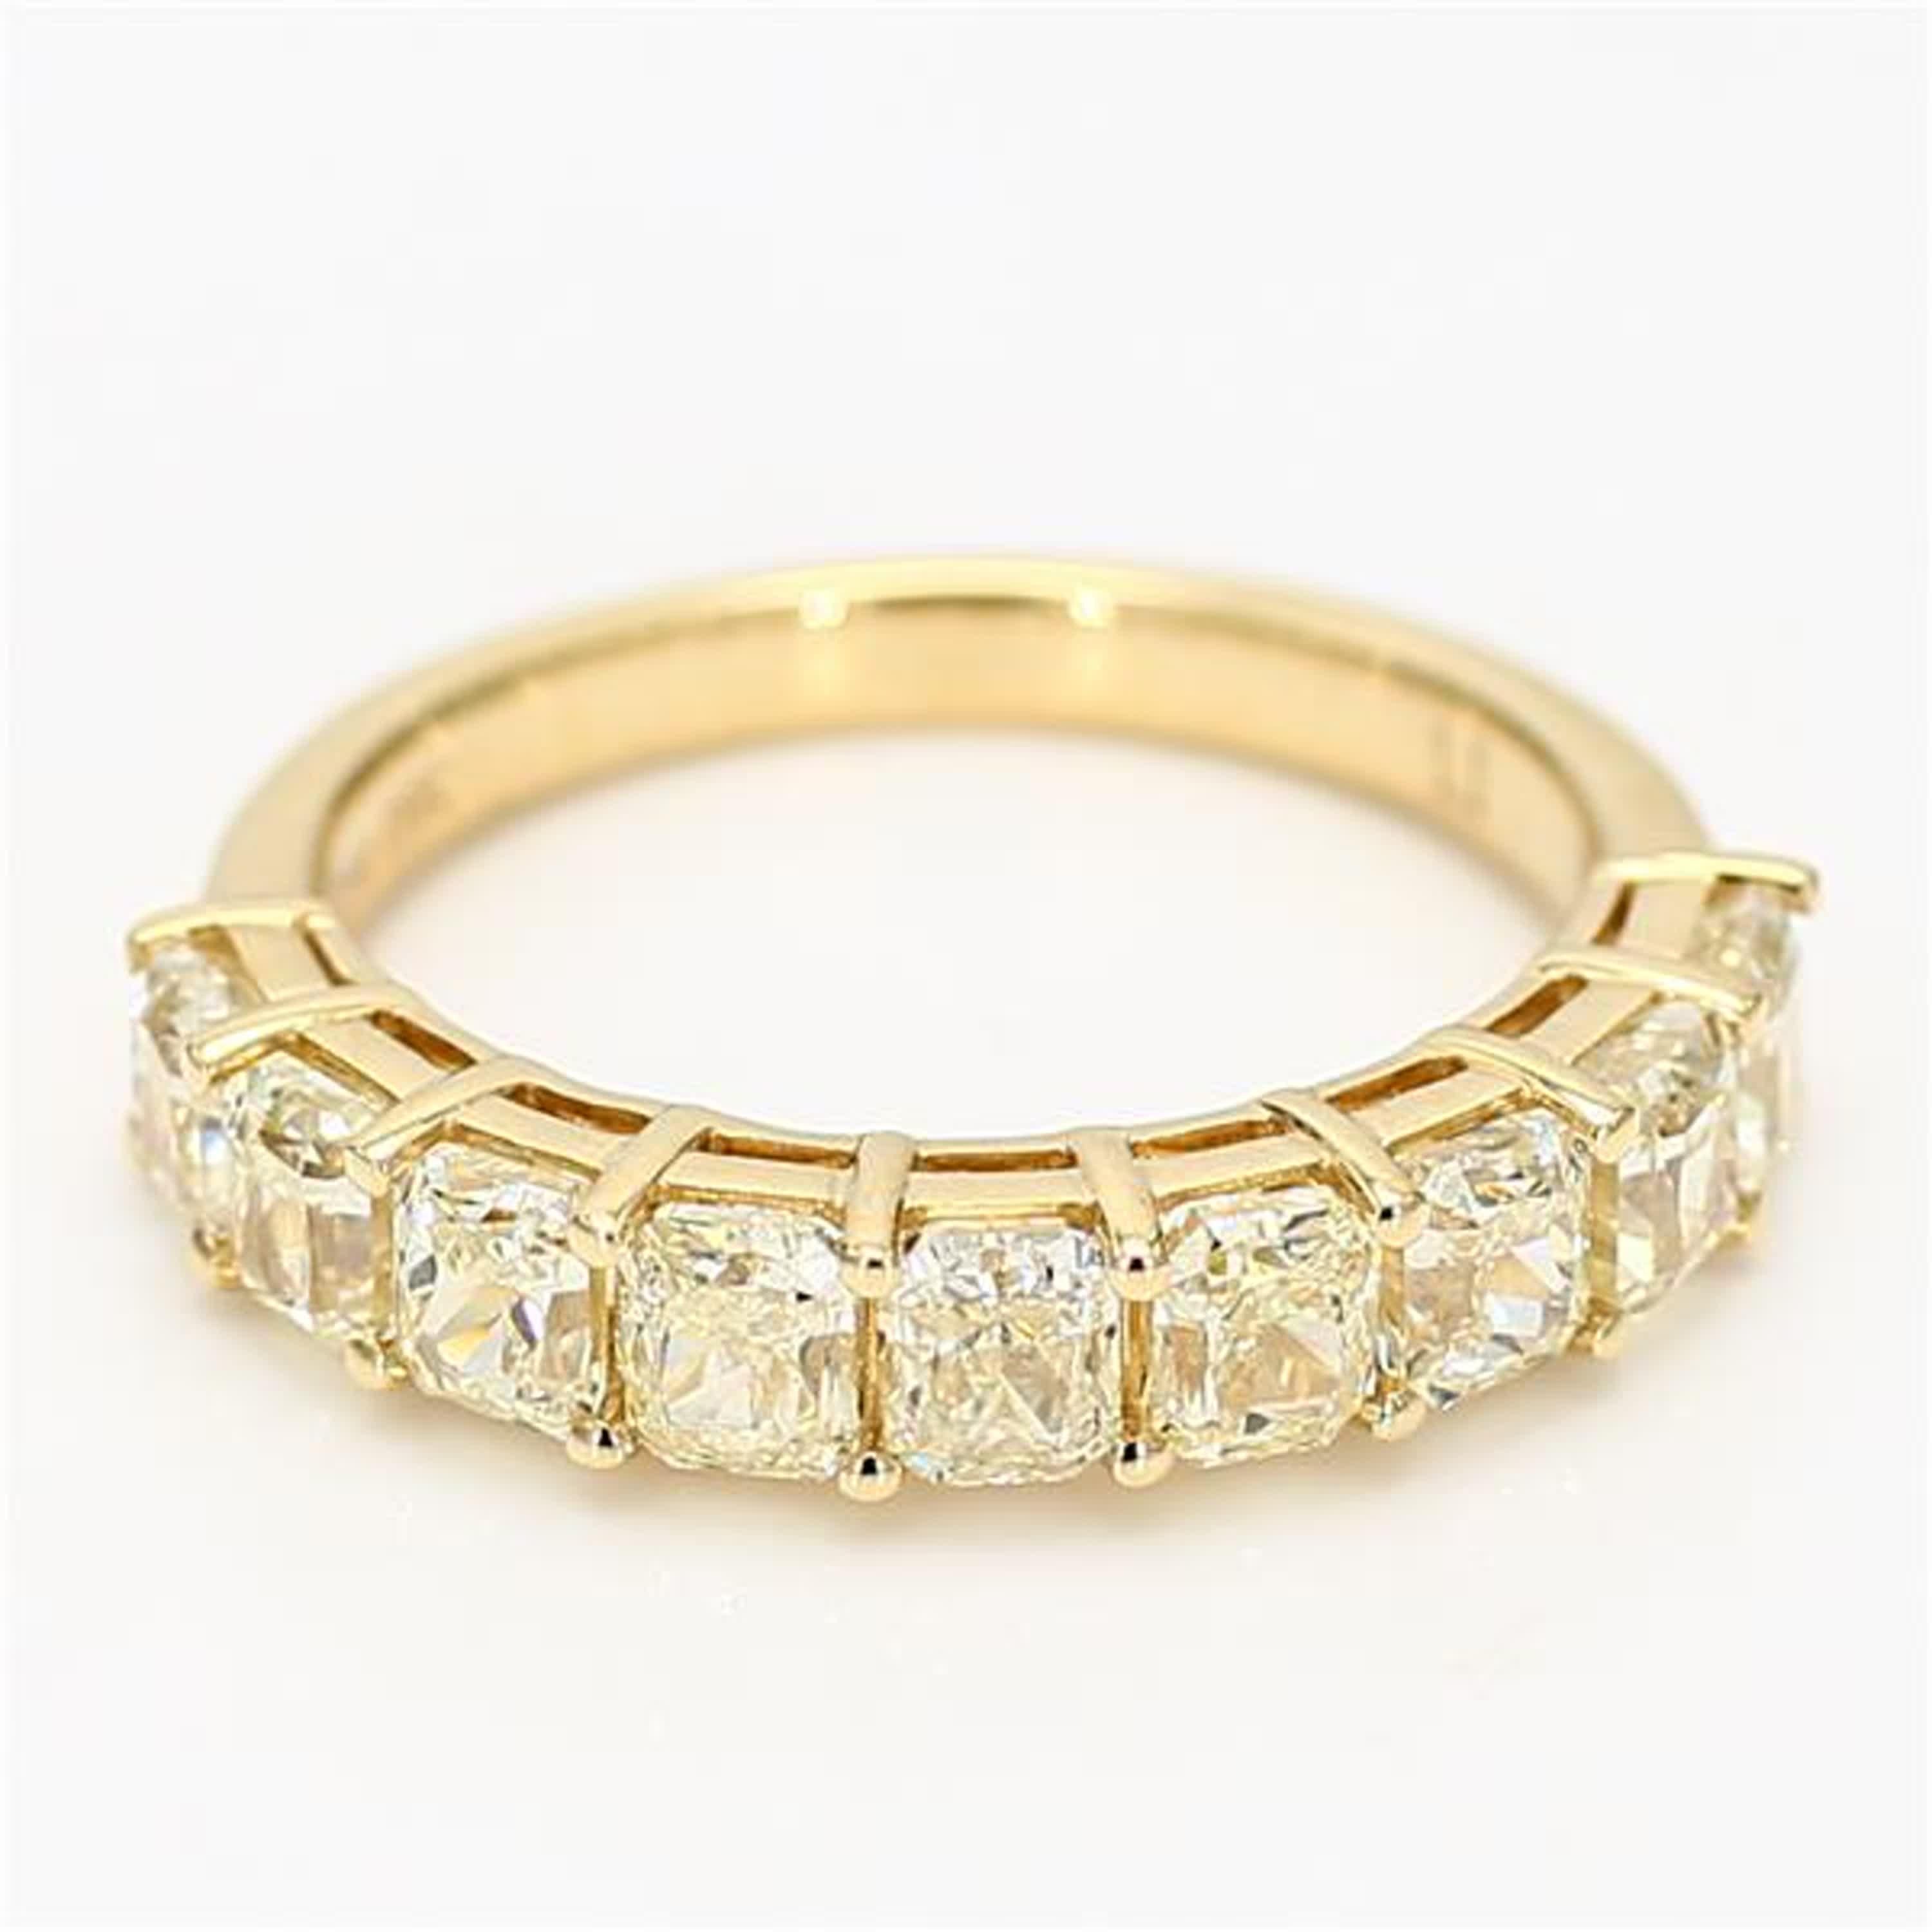 RareGemWorld's classic diamond band. Mounted in a beautiful 18K Yellow Gold setting with natural radiant yellow diamond's. This band is guaranteed to impress and enhance your personal collection!

Total Weight: 2.90cts

Length x Width: 21.5 x 4.0